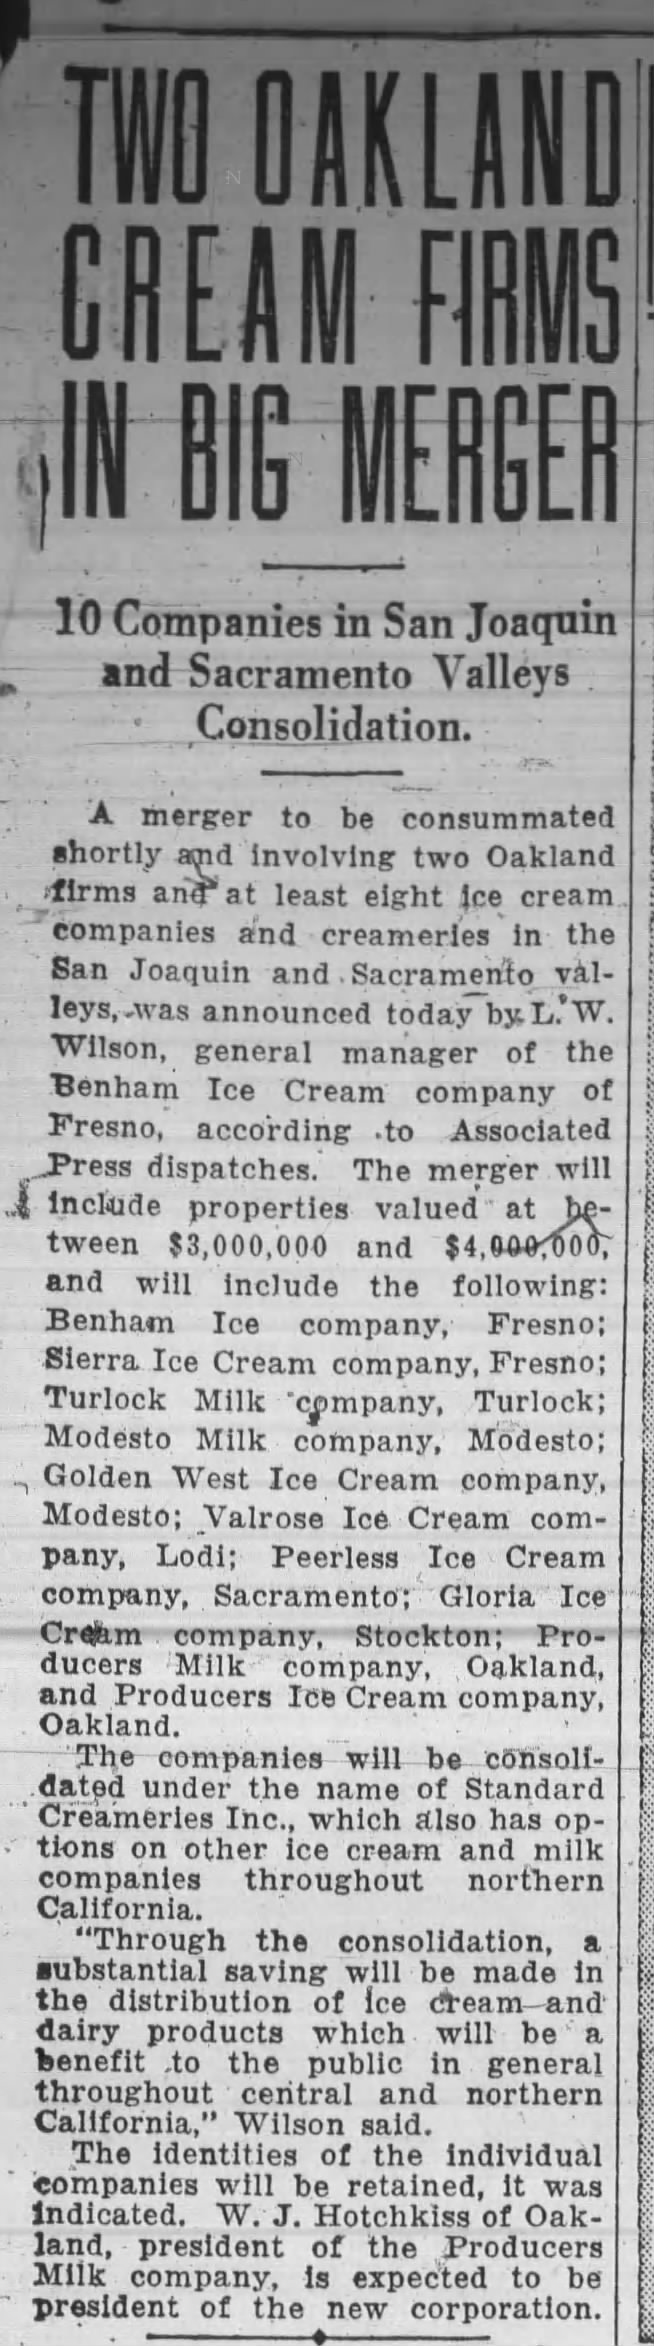 Two Oakland Cream Firms in Big Merger